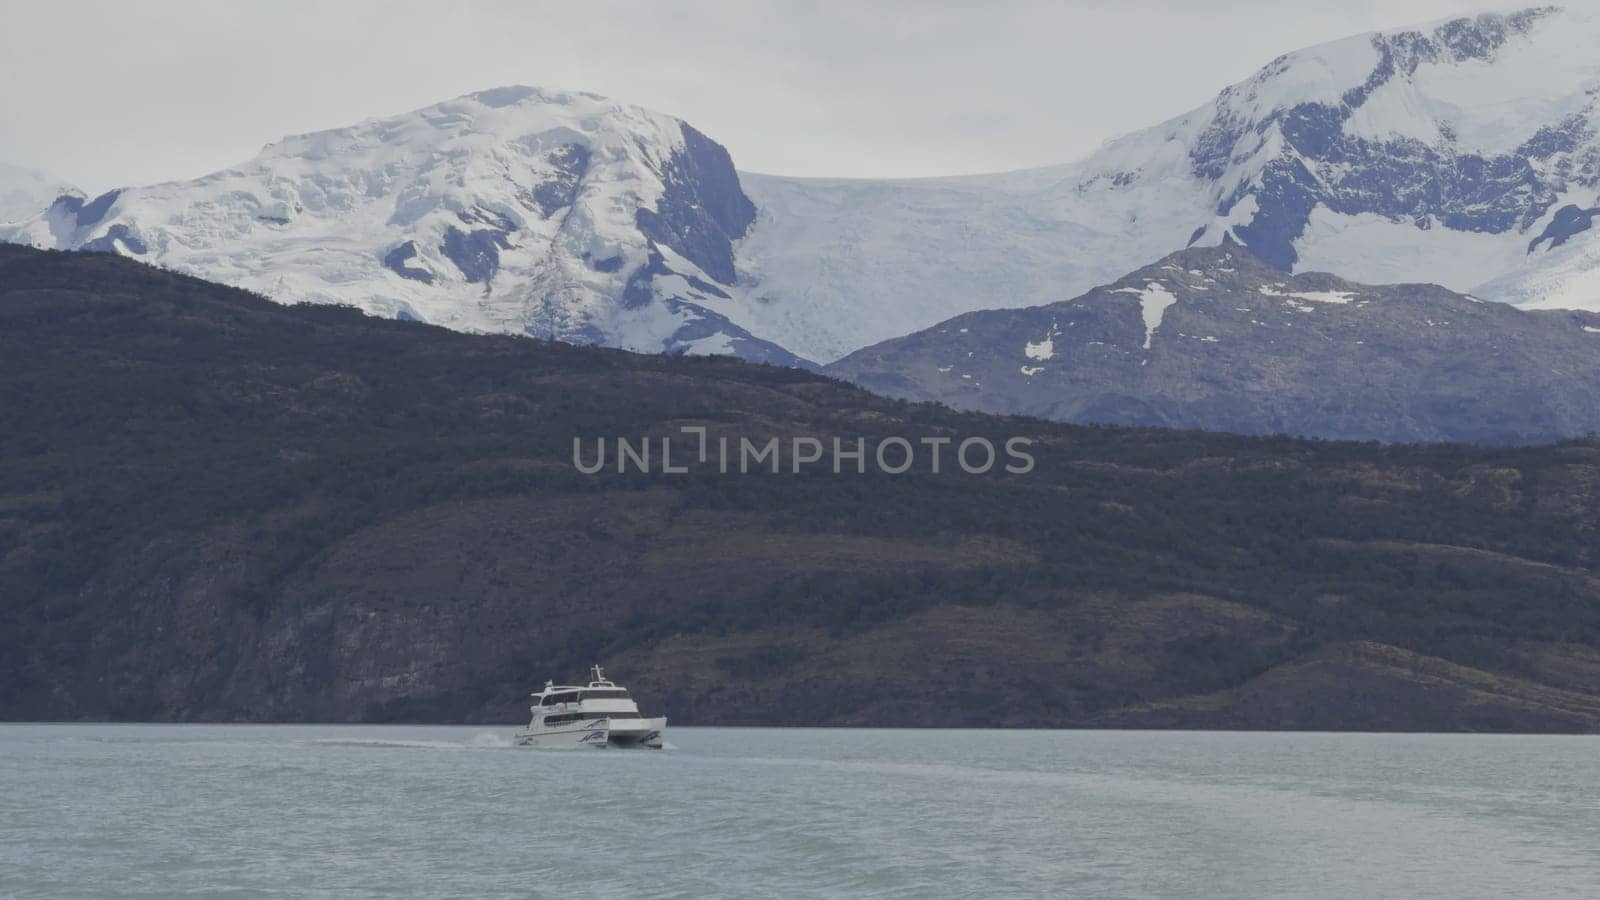 Glacier-Crowned Mountains and Boat on Serene Lake by FerradalFCG